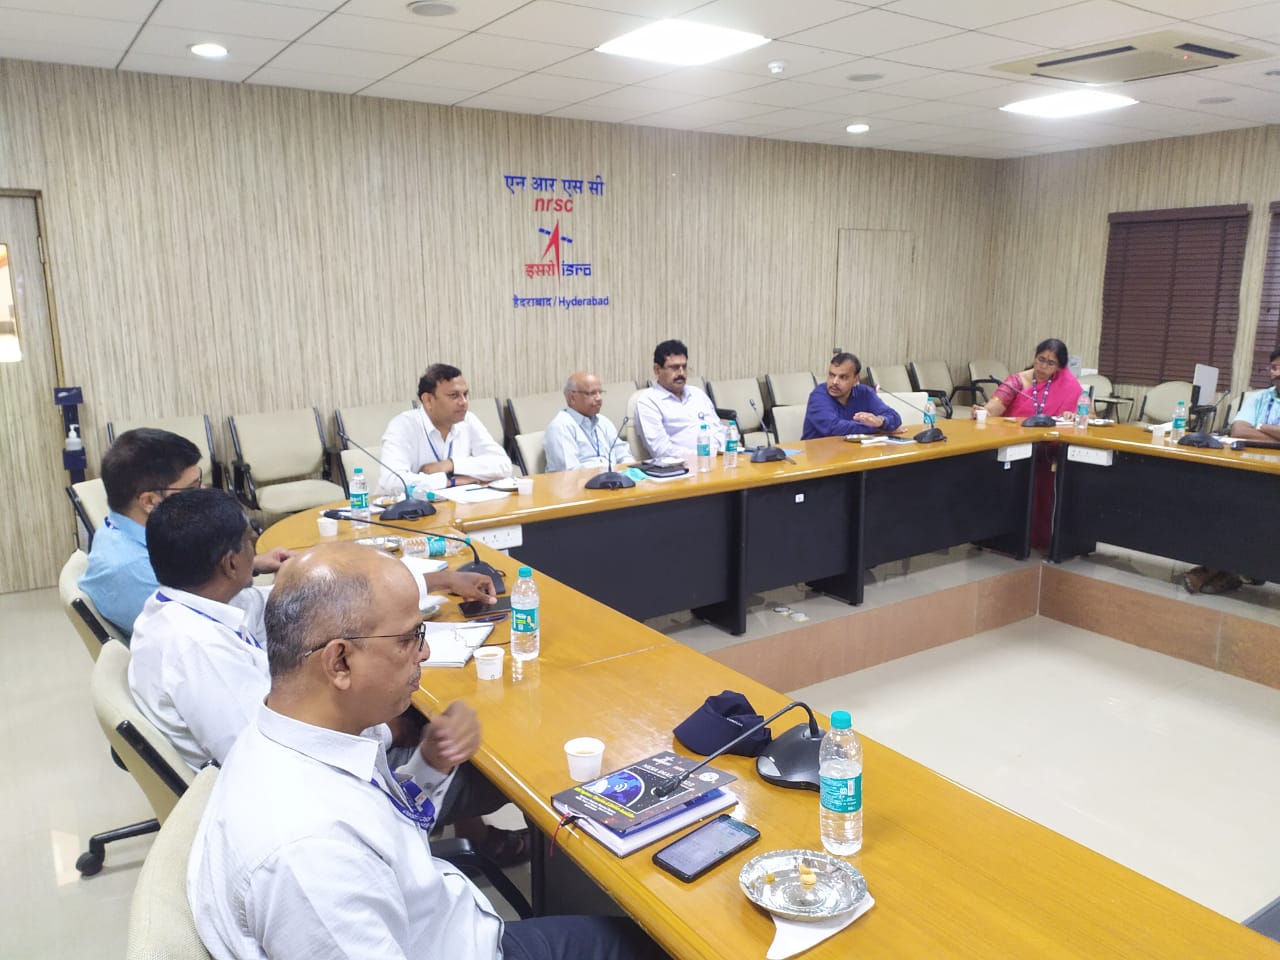 Meeting between GFCC and NRSC at Hyderabad